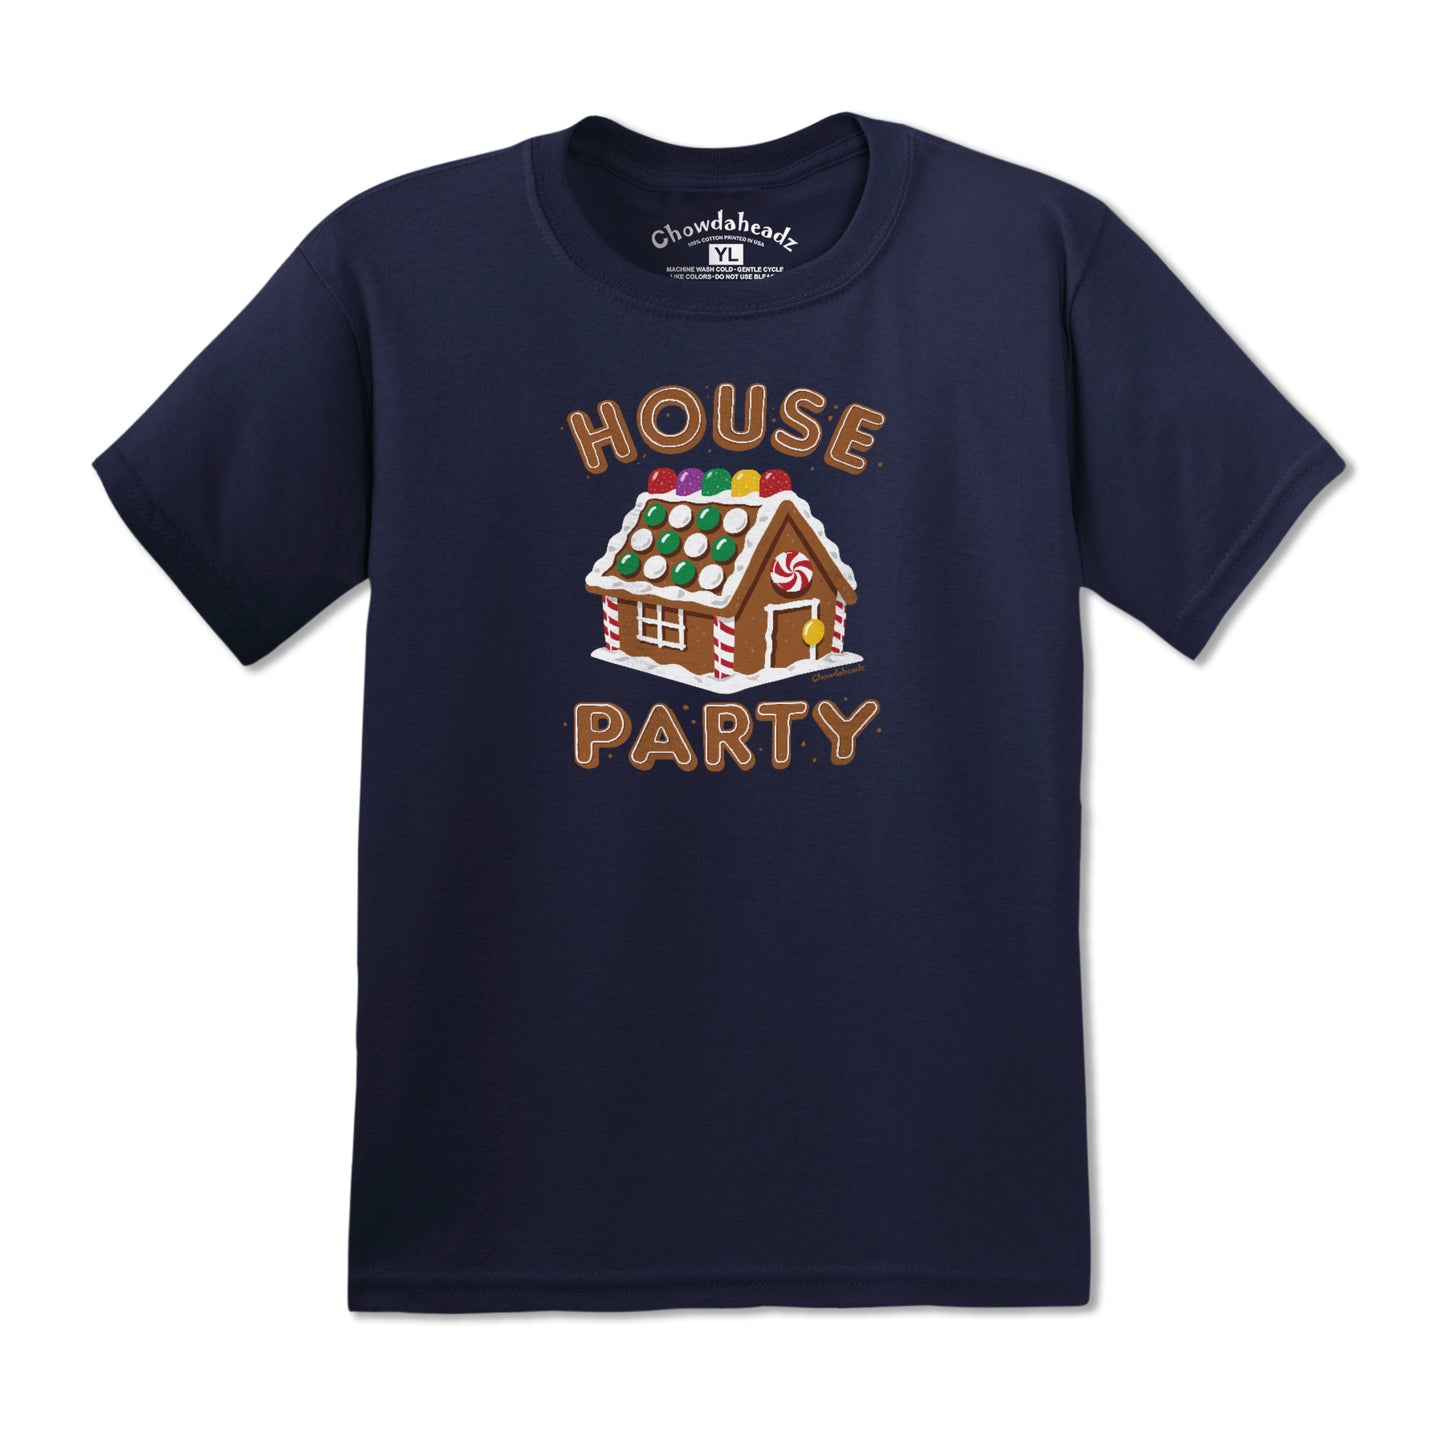 House Party Youth T-Shirt - Chowdaheadz